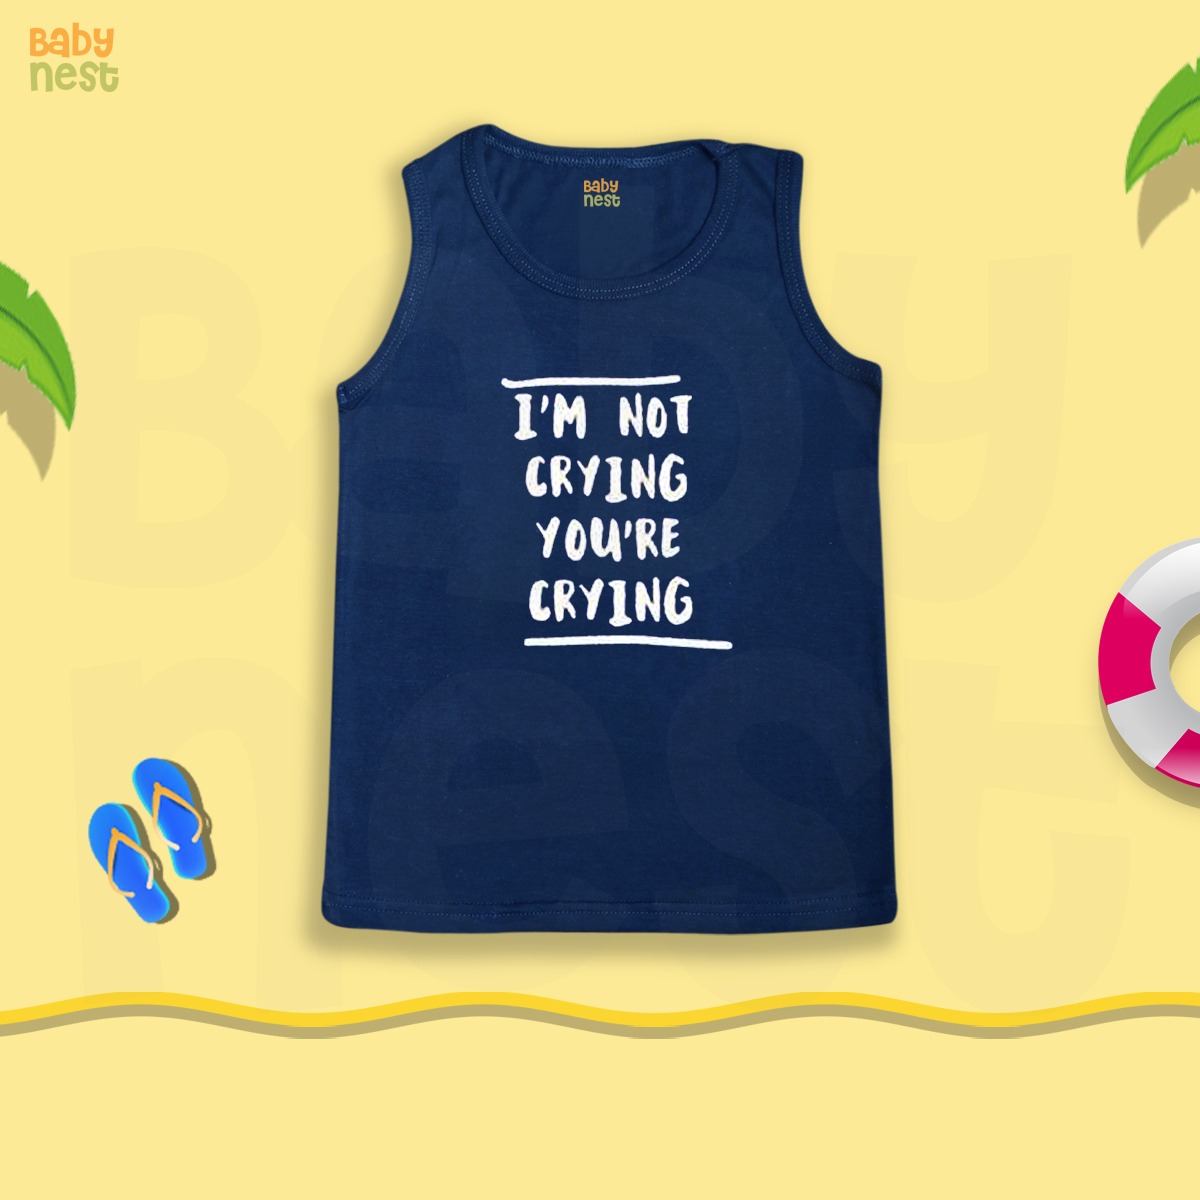 BNBBS-85 – I’M Not Crying You’re Crying Print Sandos for Kids – Blue